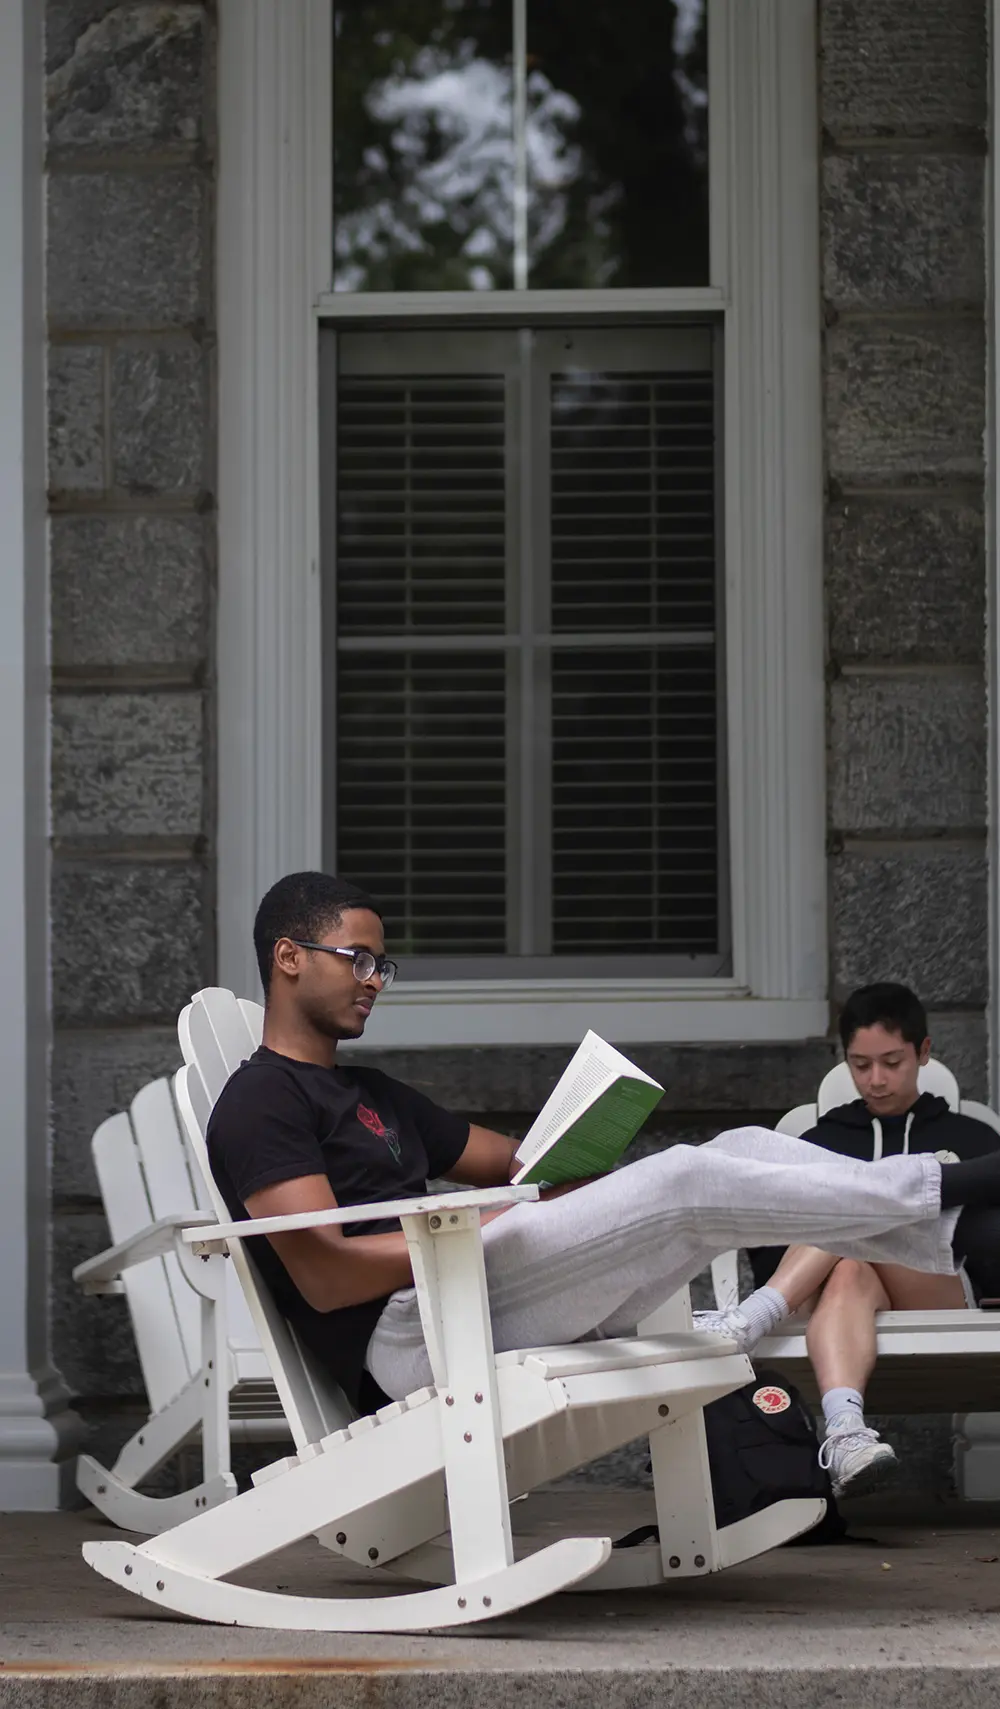 Two Swarthmore College students reading their own books as one of the guys has see through prescription glasses and has his legs extended out on a white wooden rocking chair while the other guy is sitting on a non-rocking chair